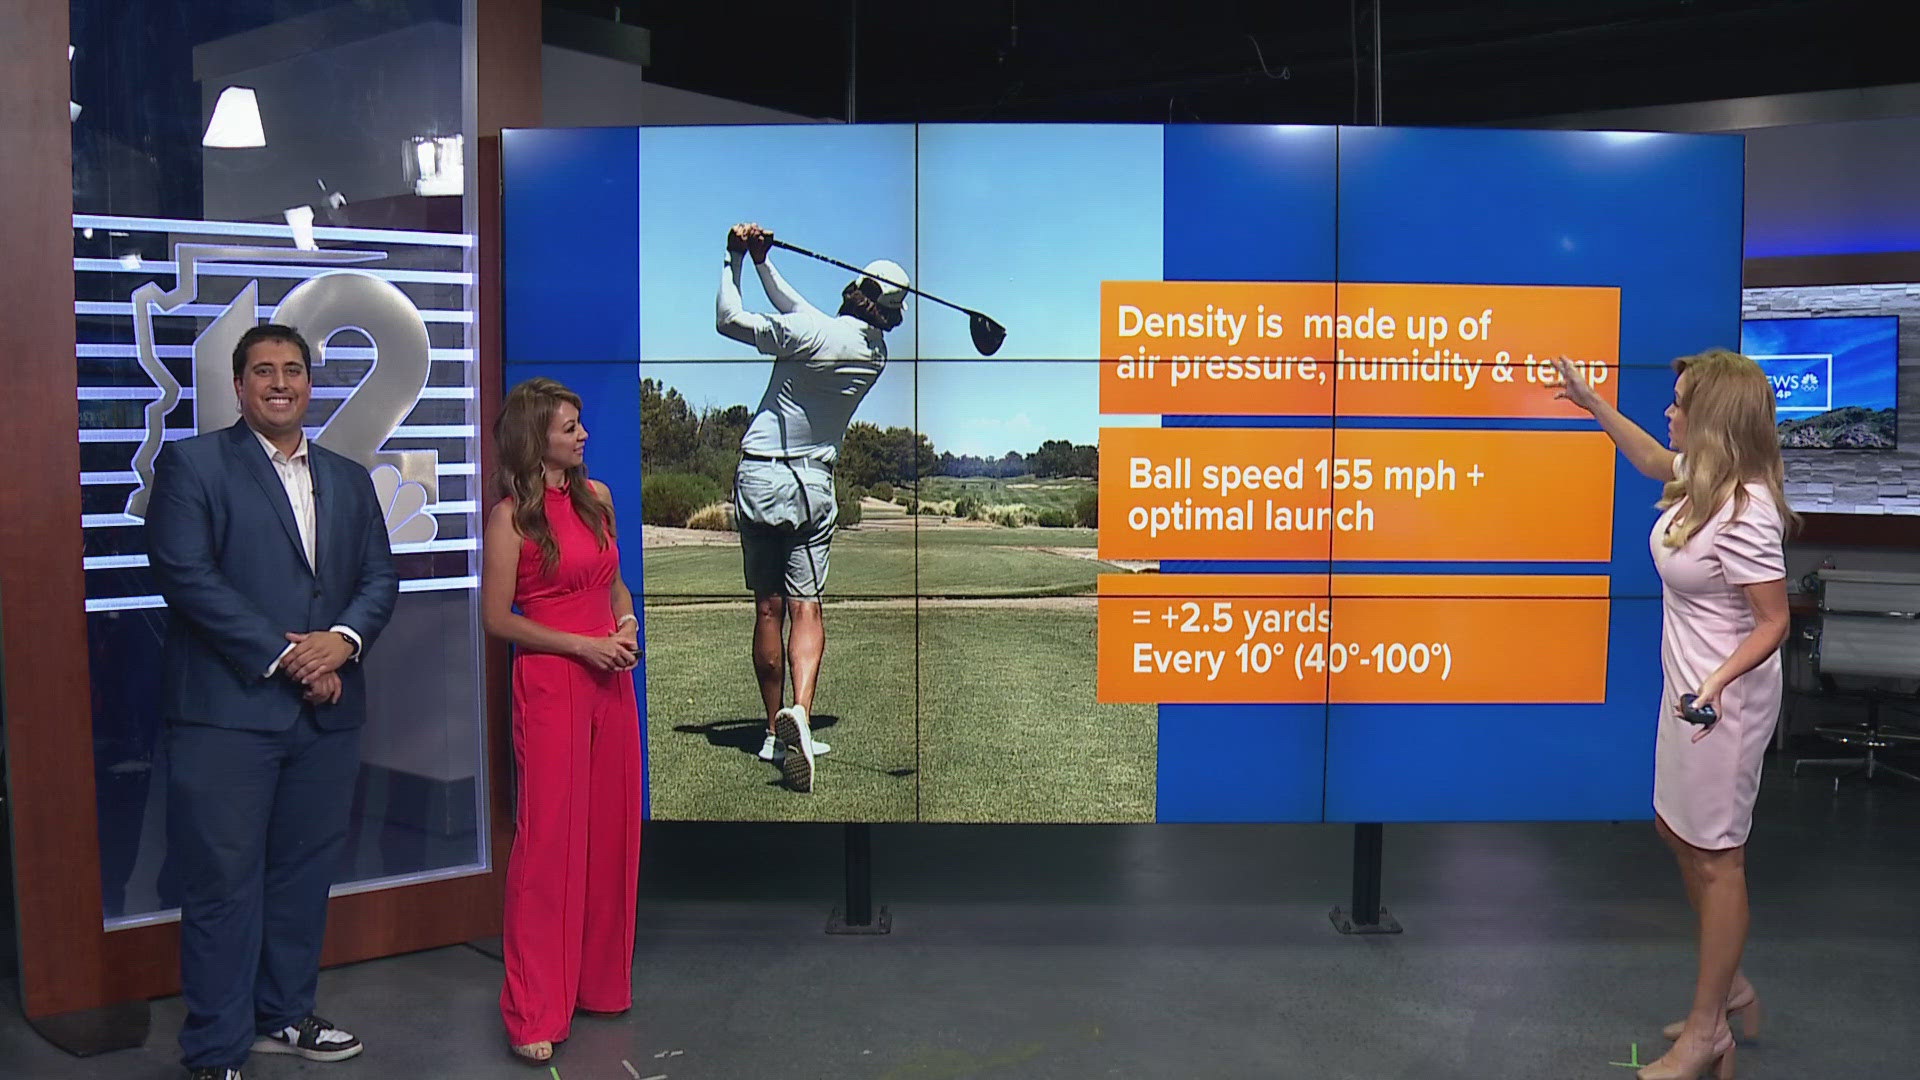 If you have a summer tee time, here are a few things you need to know.